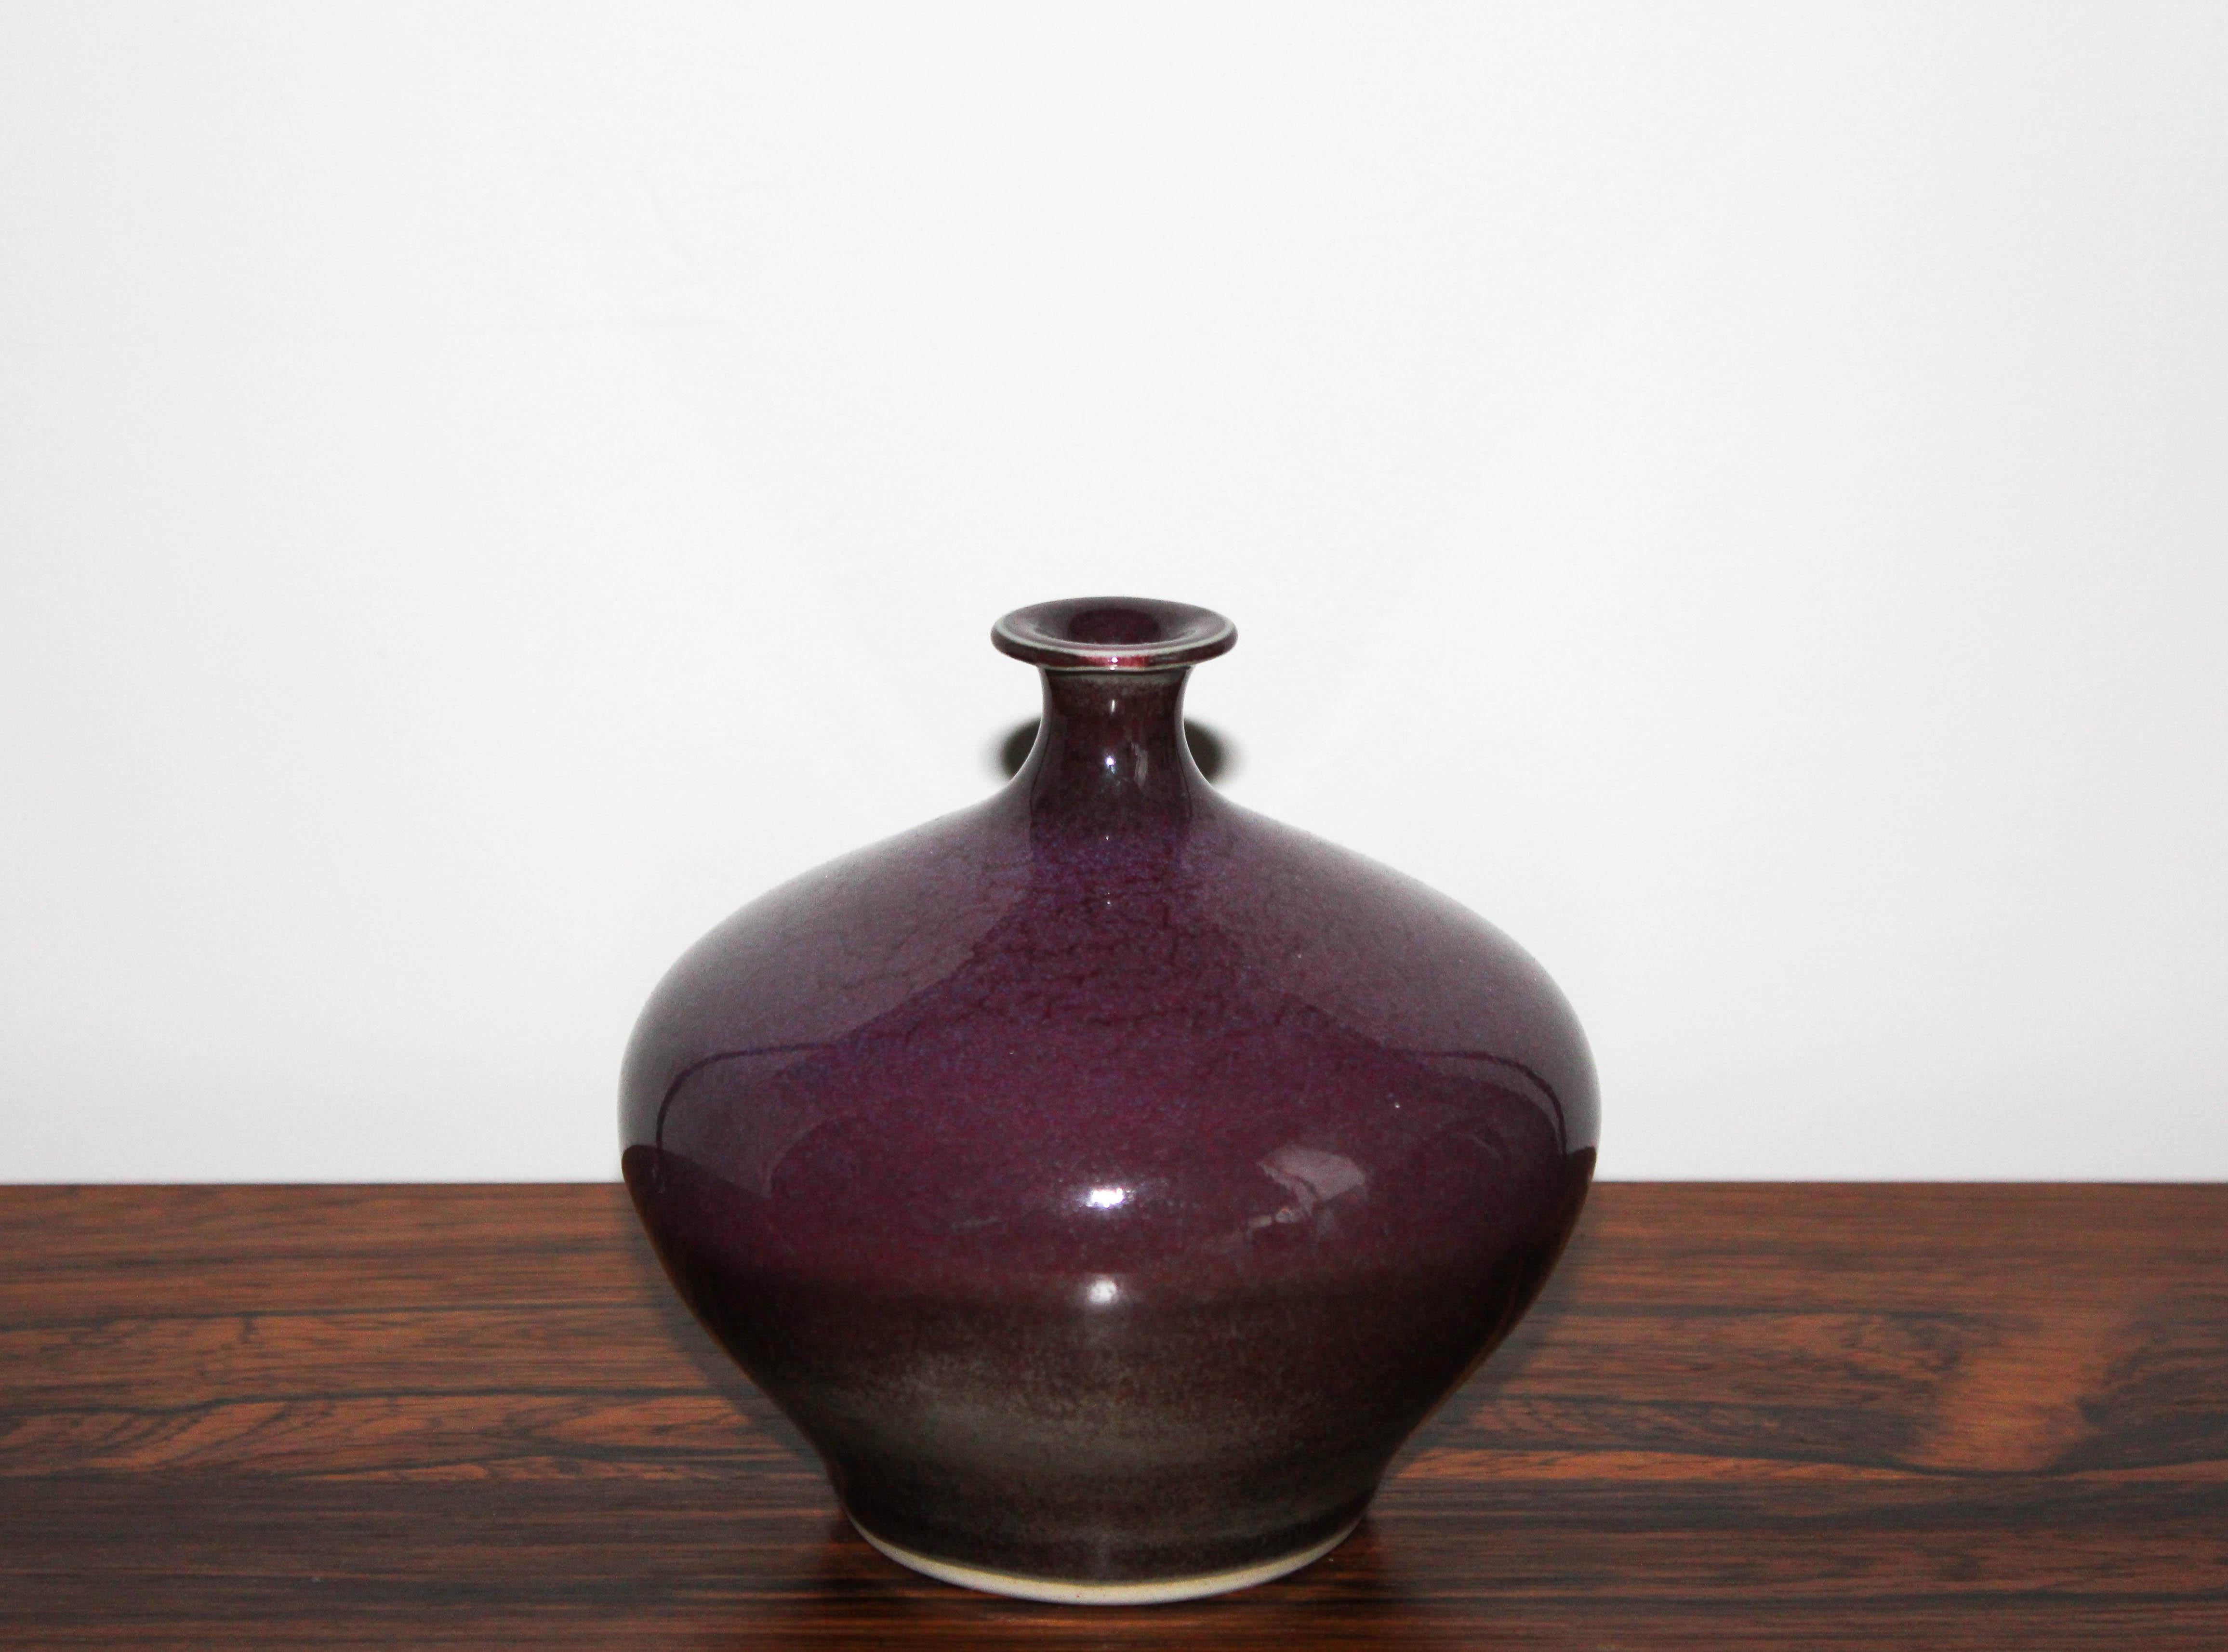 Swedish Ceramic Vase by Sven Hofverberg In Excellent Condition For Sale In Malmo, SE